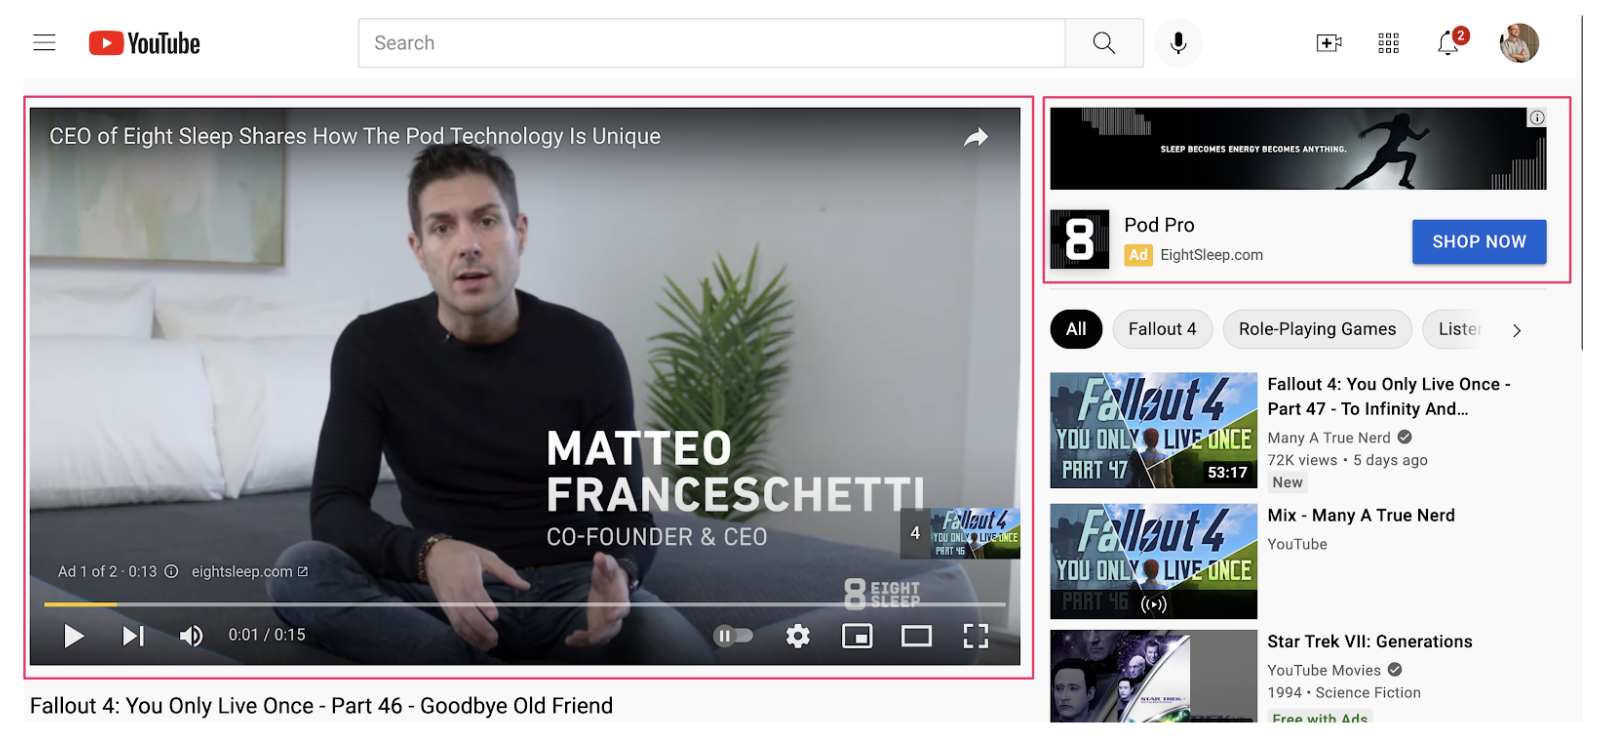 example of a youtube video with google ads highlighted